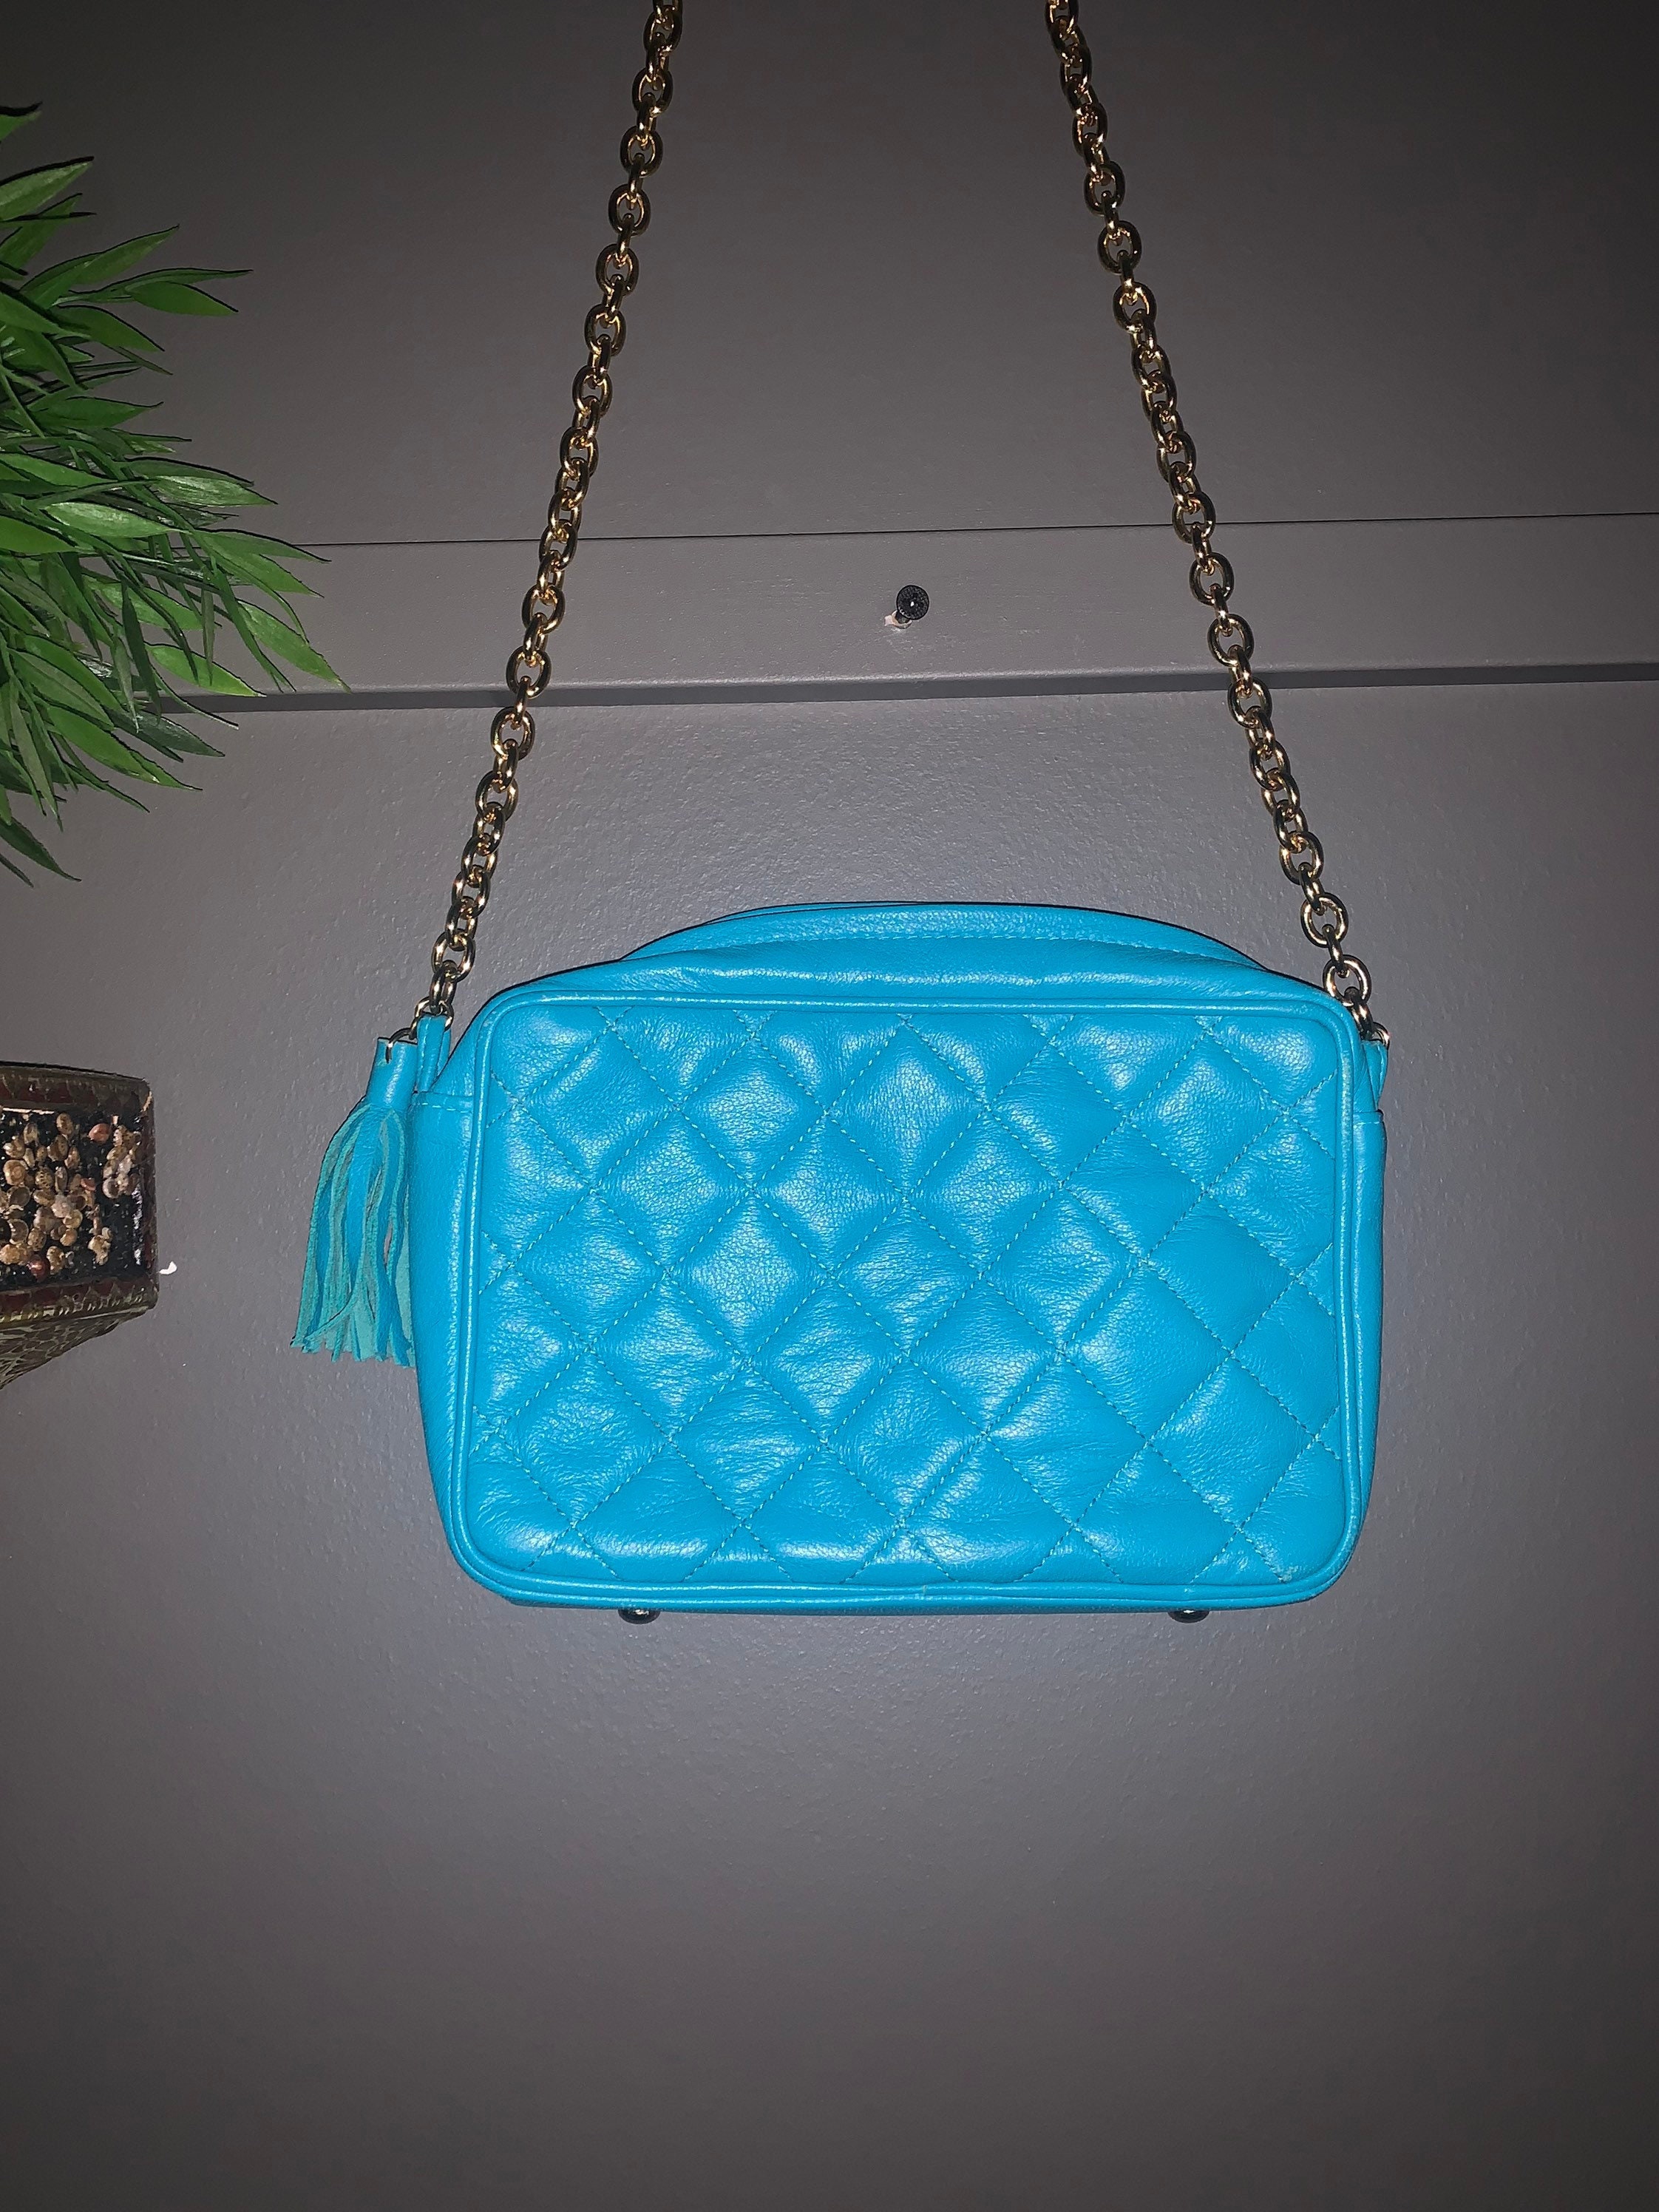 Vintage Teal Colored Faux Leather Quilted Crossbody Chain Bag 